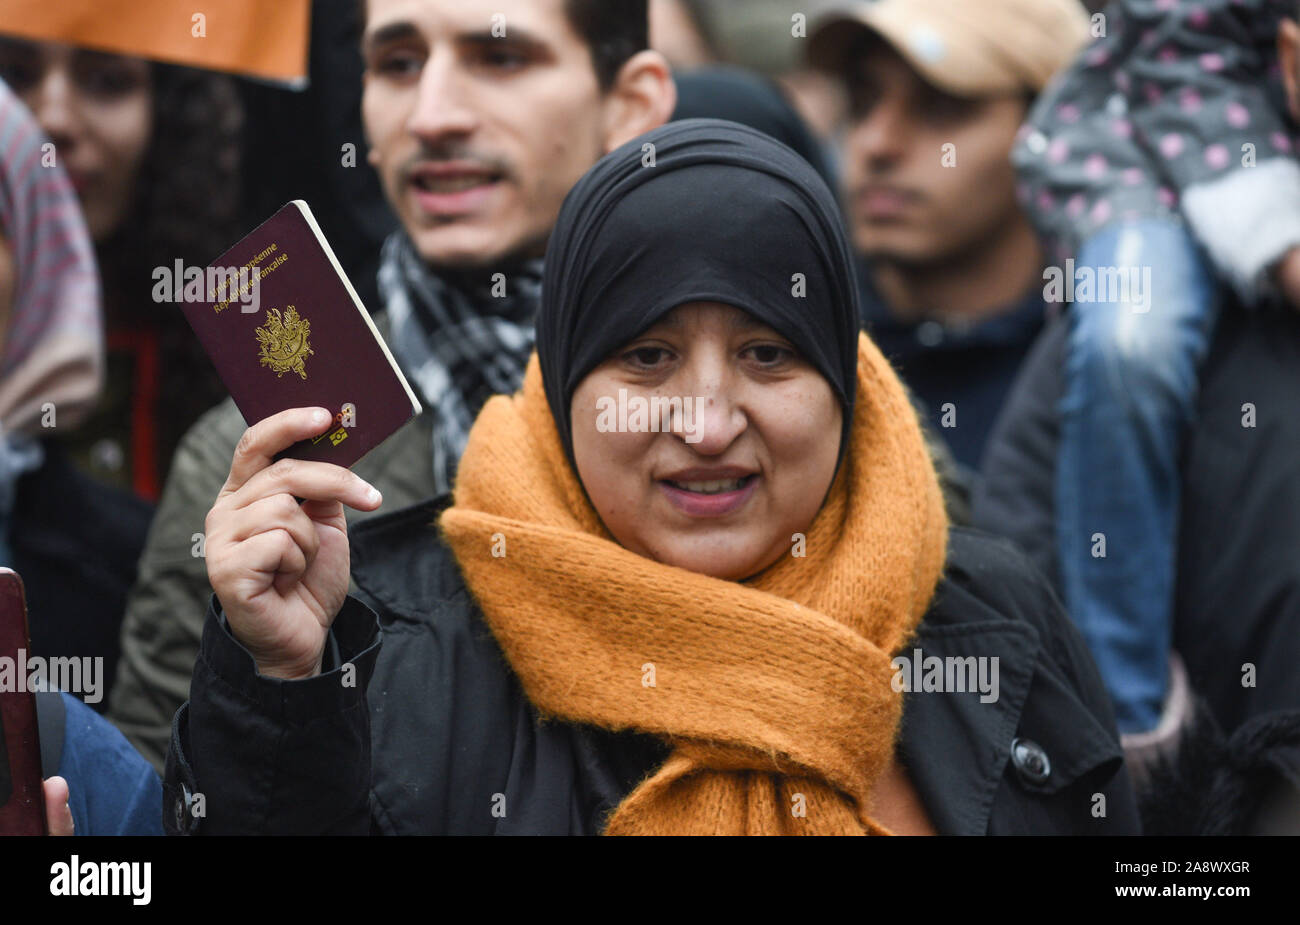 *** STRICTLY NO SALES TO FRENCH MEDIA OR PUBLISHERS *** November 10, 2019 - Paris, France: Thousands of people hold a march against islamophobia two weeks after an attack against a mosque in Bayonne and a rise in anti-Islam scaremongering in the French political class. Protesters hold their passports and national IDs to show they are French. Des milliers de manifestants prennent par a la grande marche contre l'islamophobie. Stock Photo